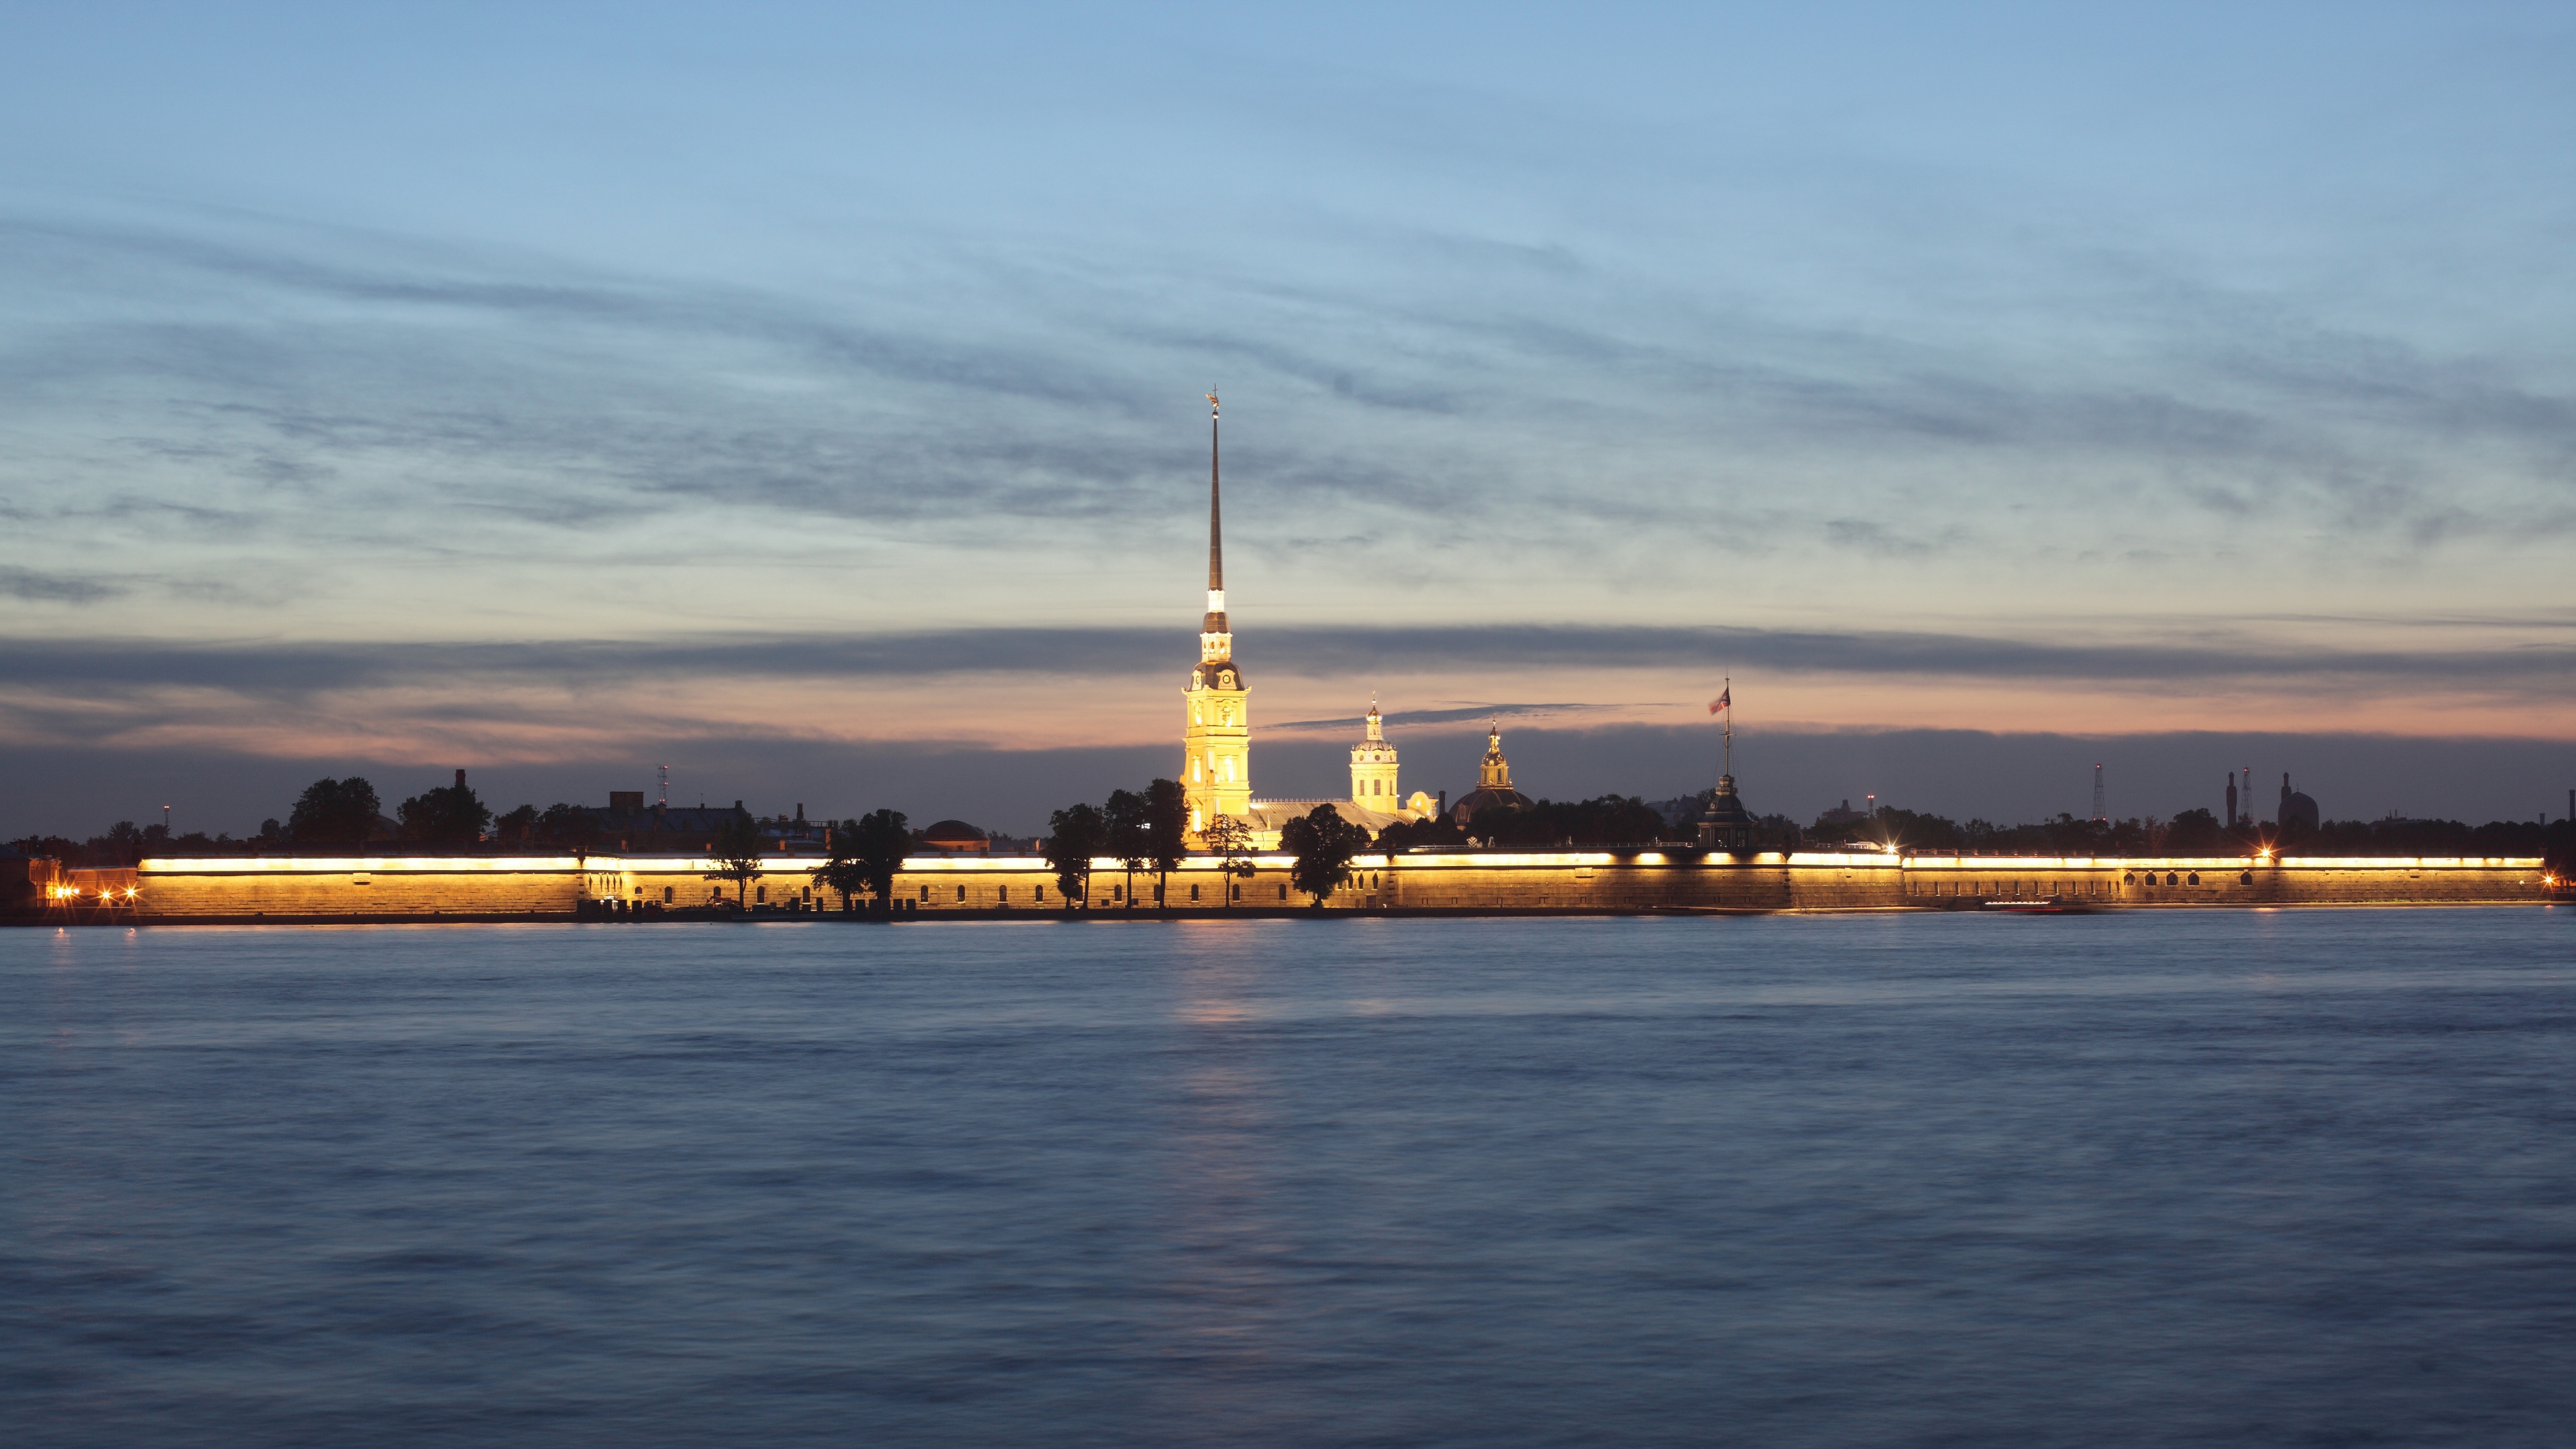 General 3840x2160 Russia St. Petersburg river fortress water cityscape dusk low light